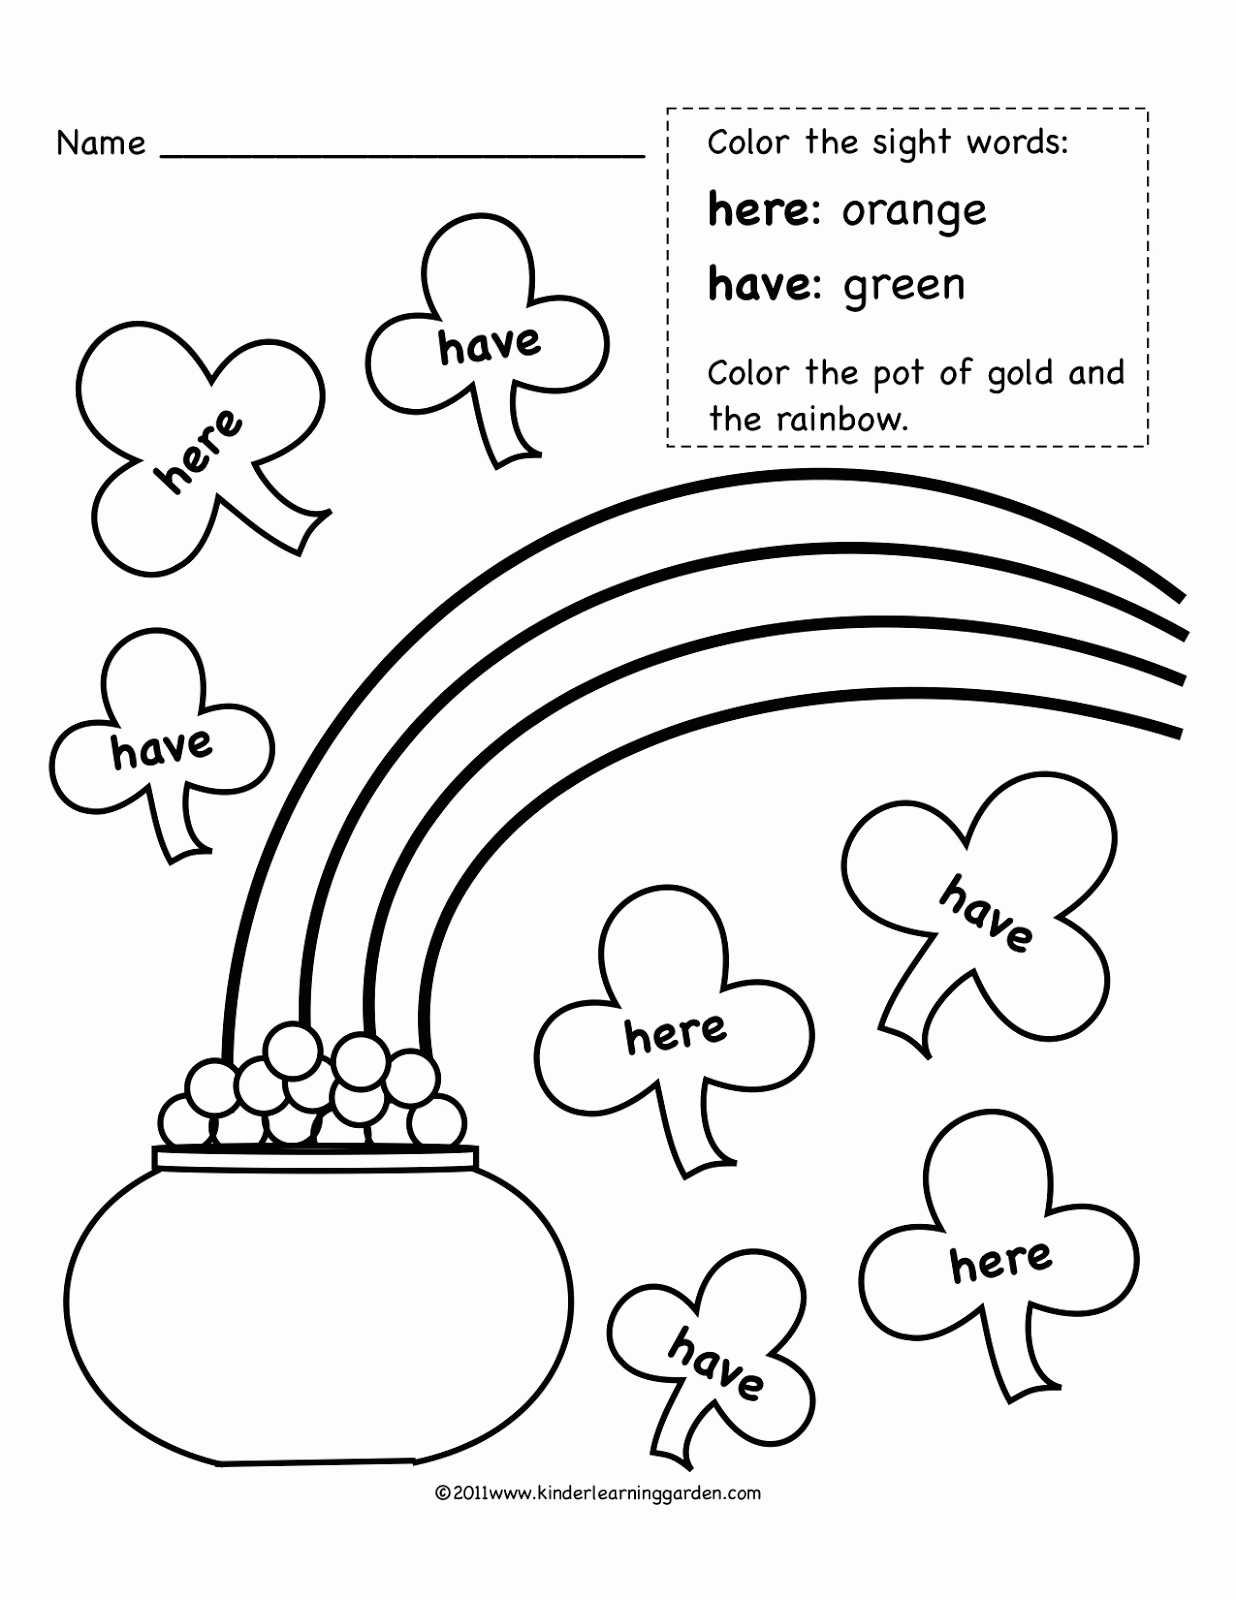 Leaf Templates - Free Printable Templates & 26+ Word Coloring Pages Printable - FirstPalette.com